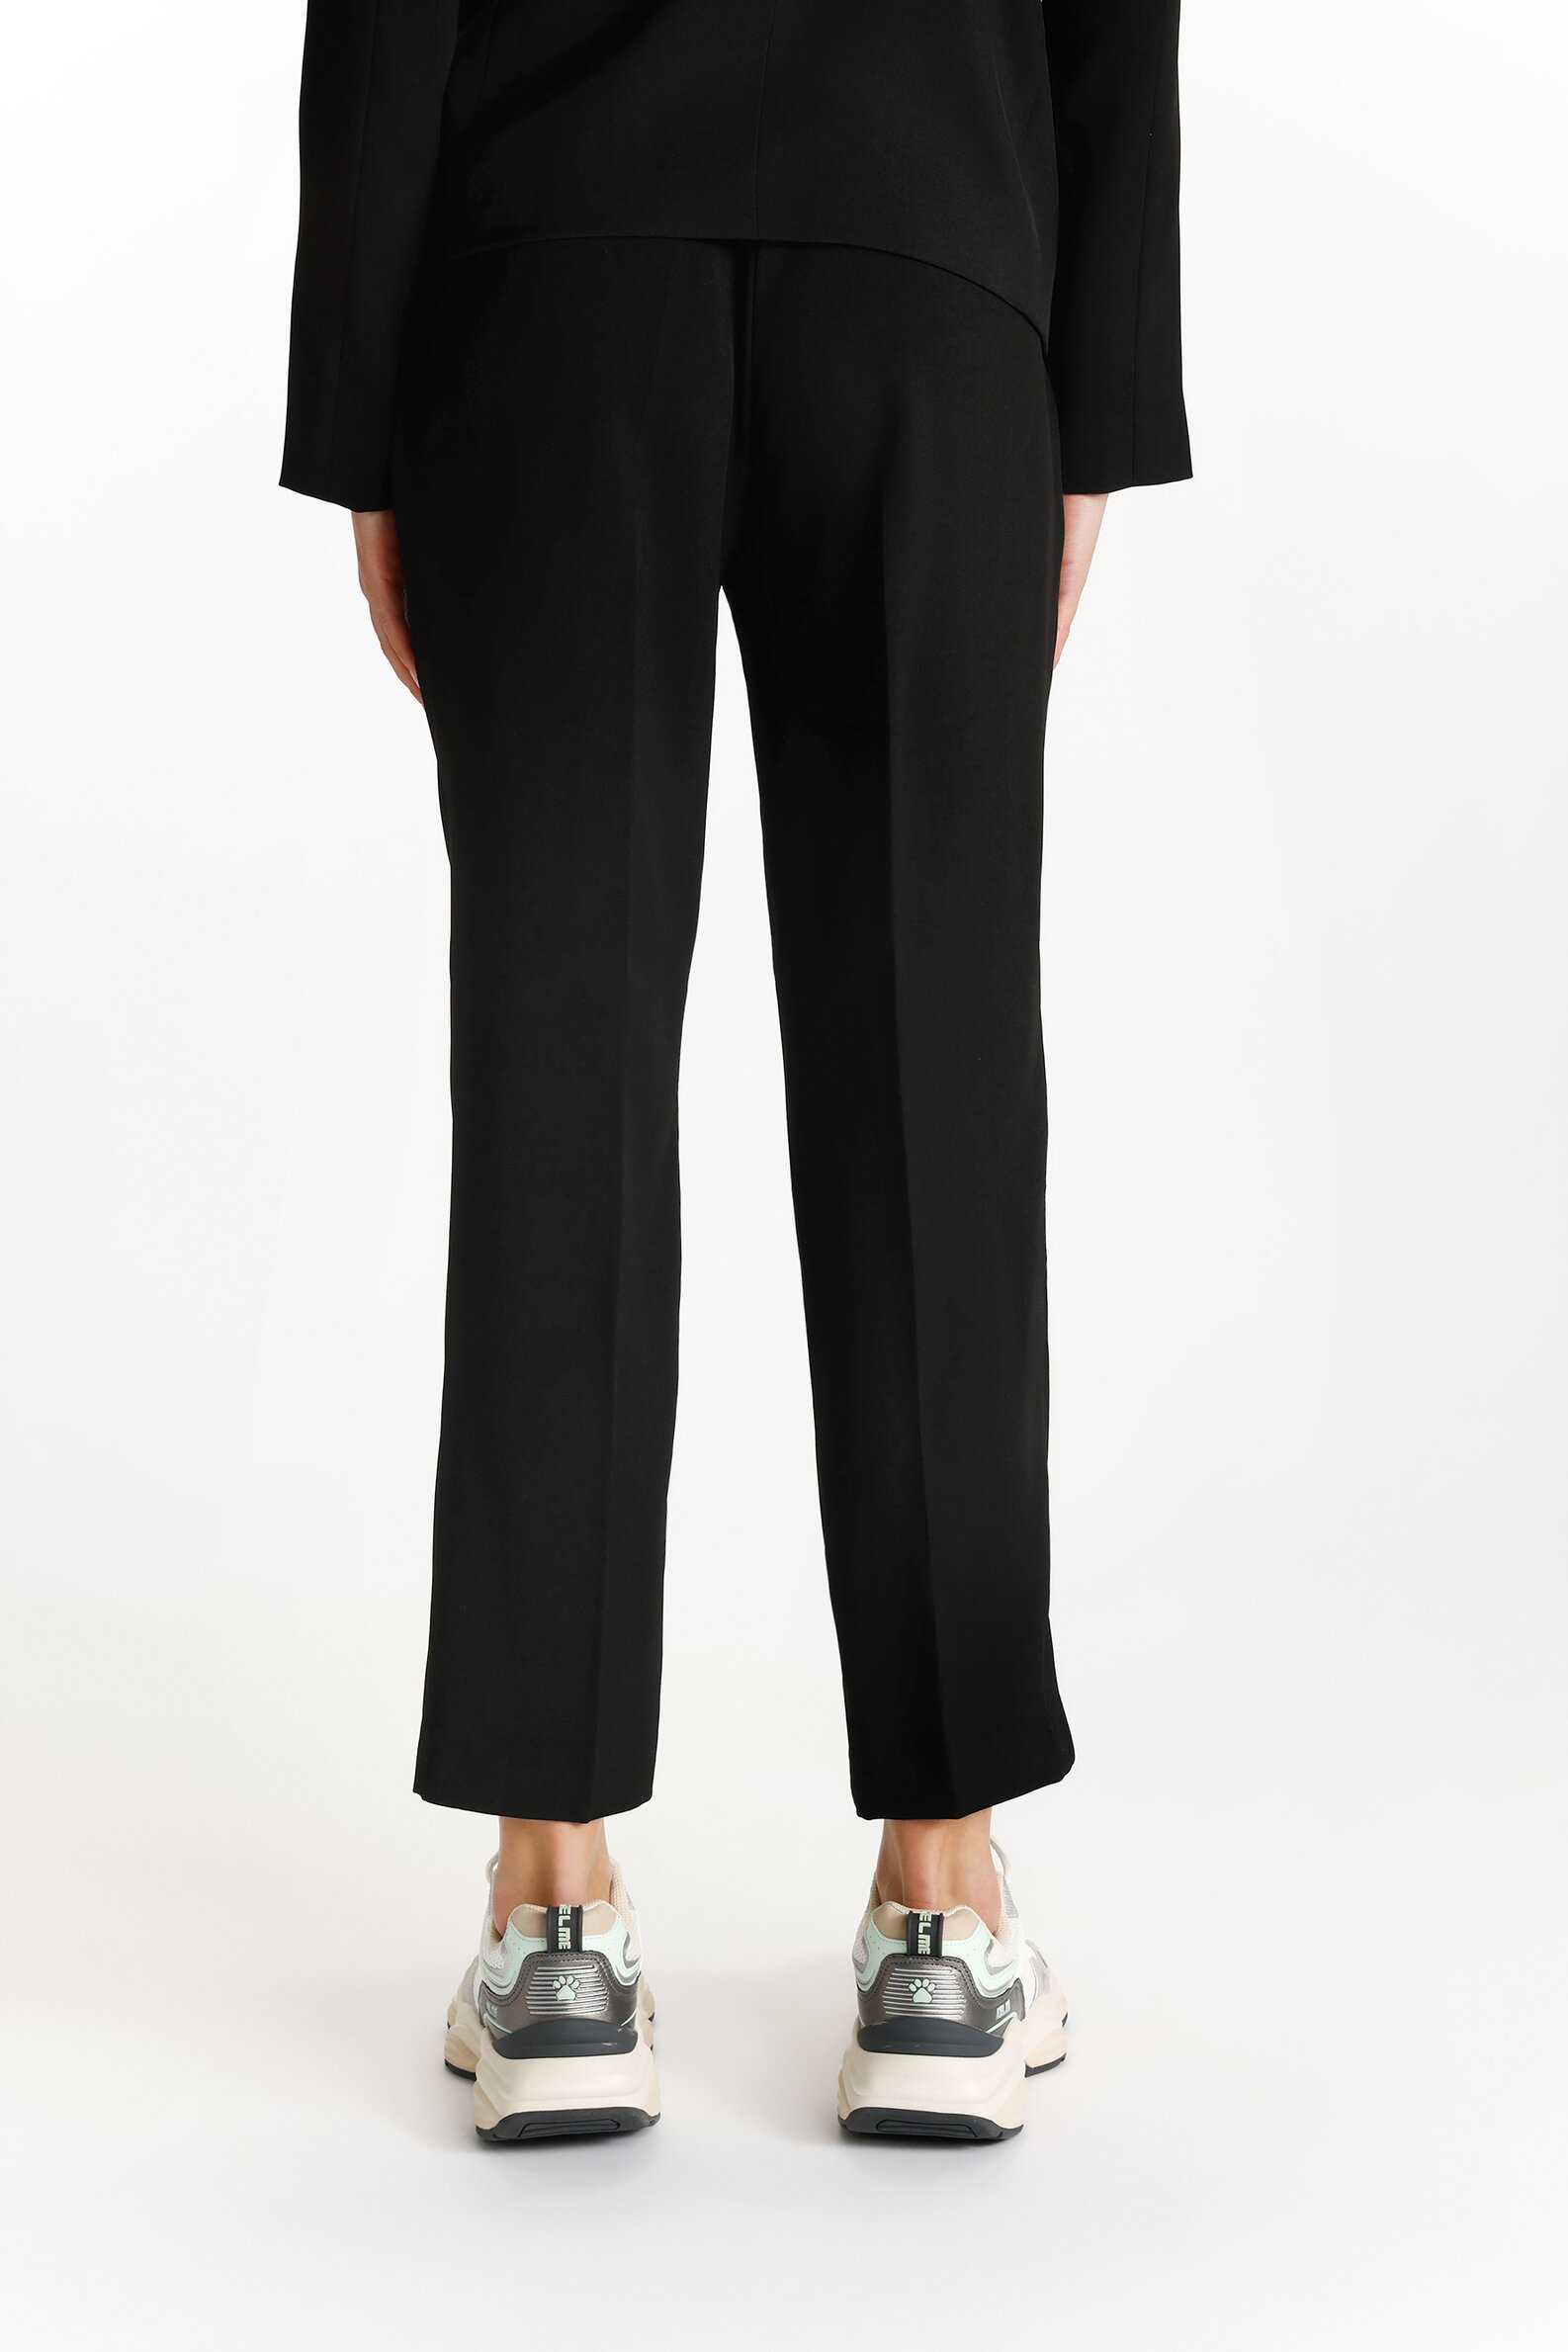 Wide Leg Trousers, Occasion Wear, for Maternity - black dark solid,  Maternity